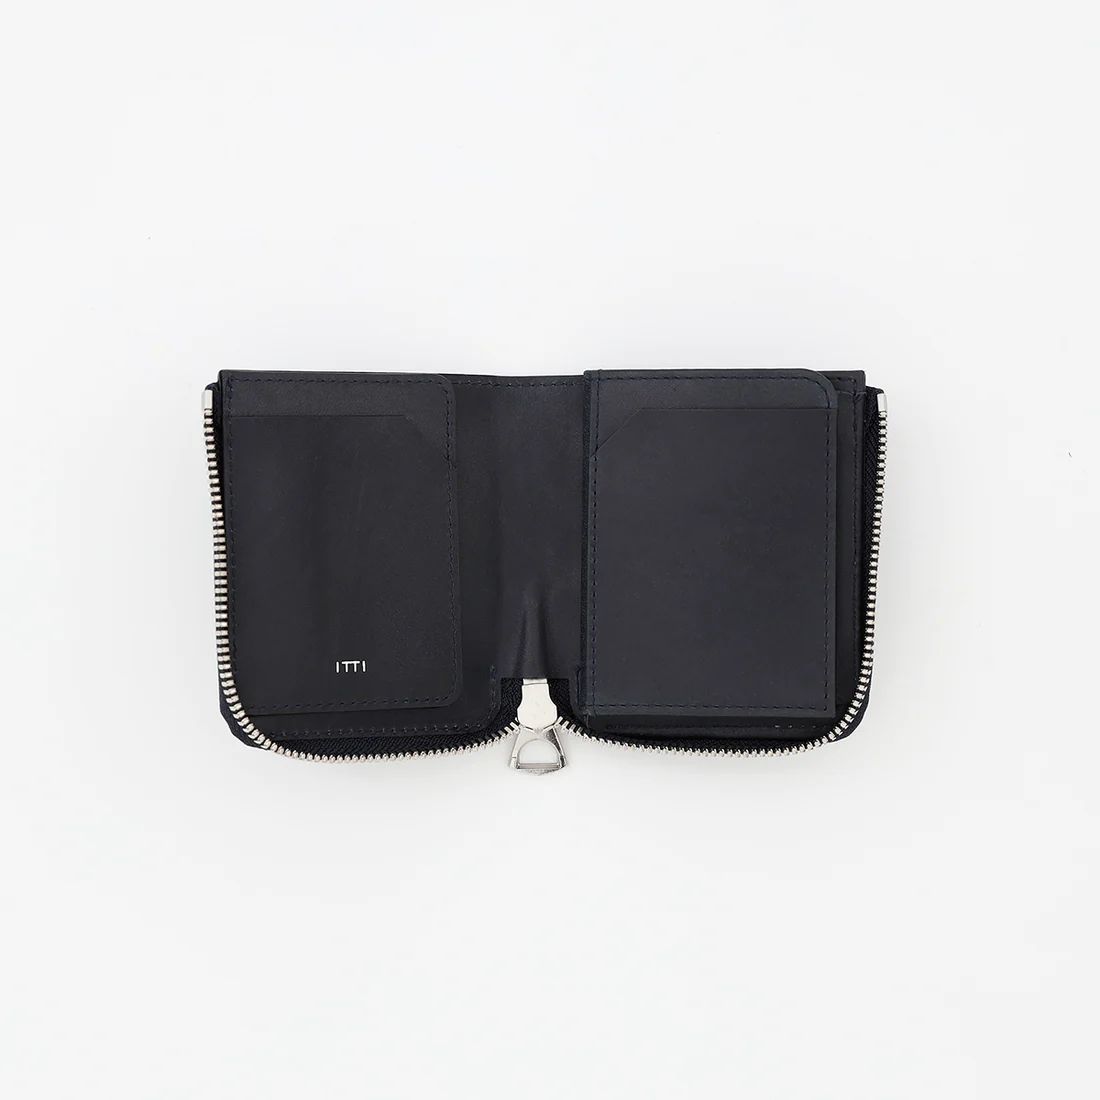 ONLINE　【残りわずか】Cristy　Compact　STORE　WLT.5(CARNO)　ACRMTSM　ITTI　Very